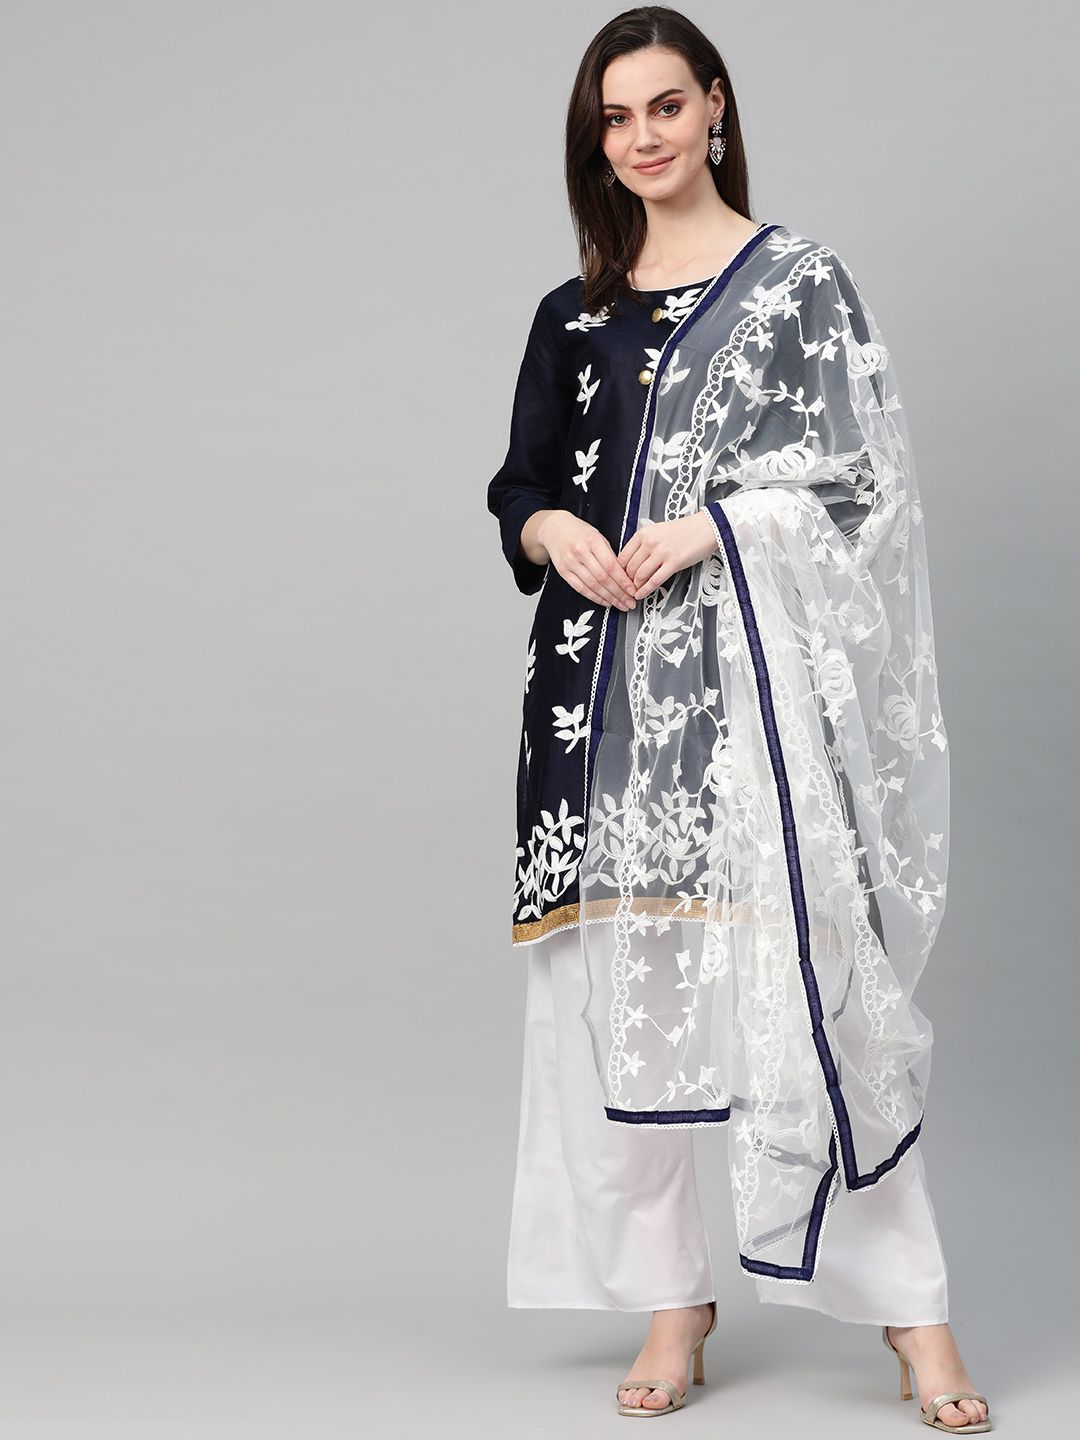 Ishin Navy Blue & White Embroidered Unstitched Dress Material Price in India